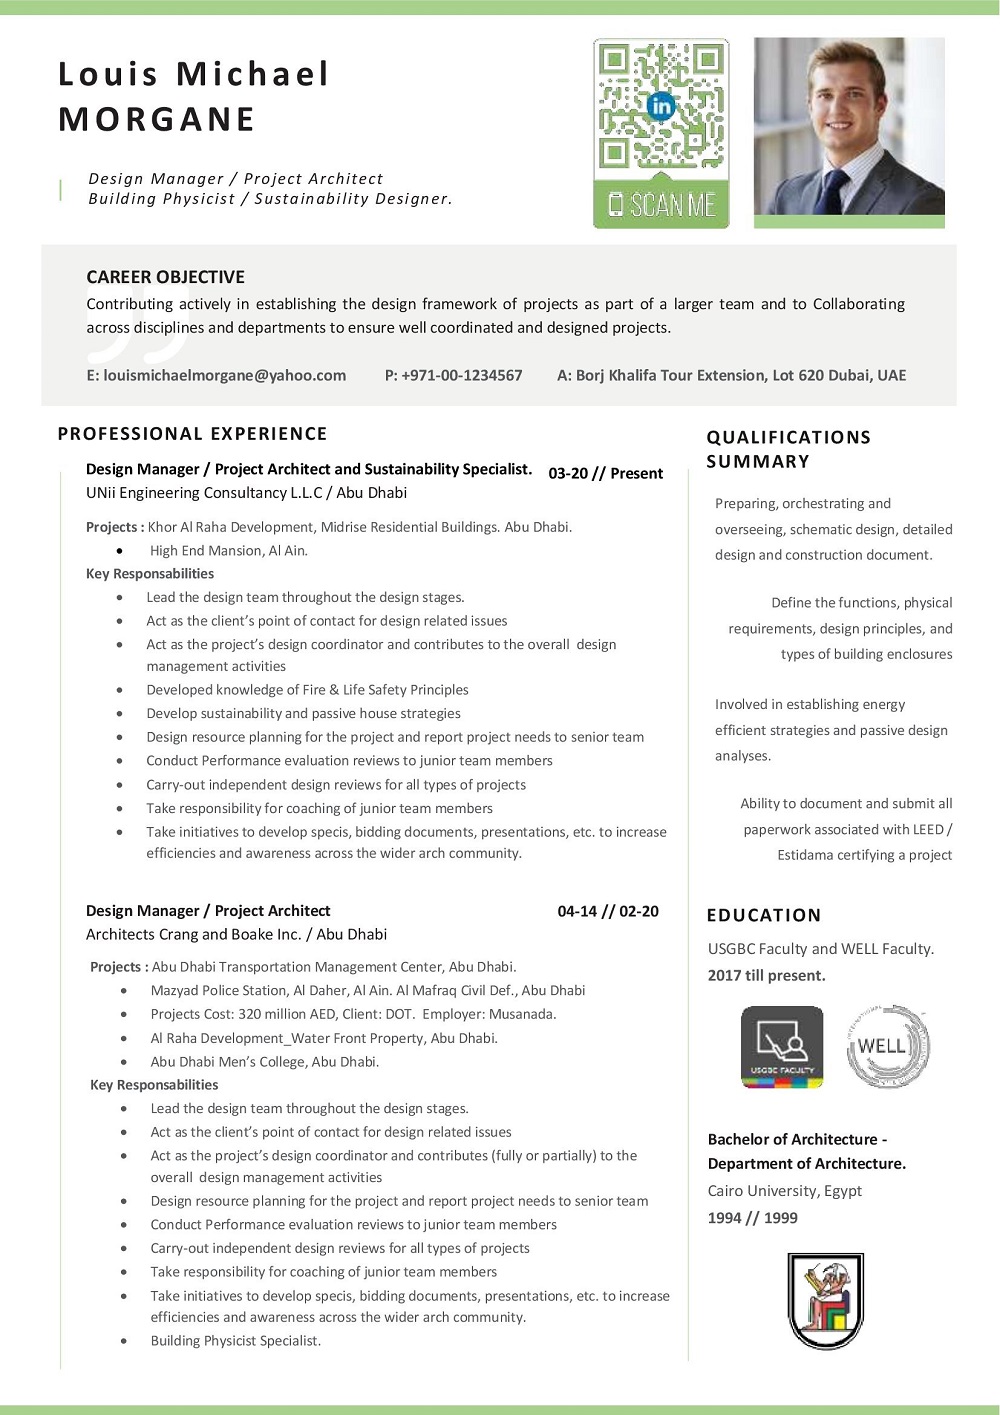 CV Design Manager and Project Architect